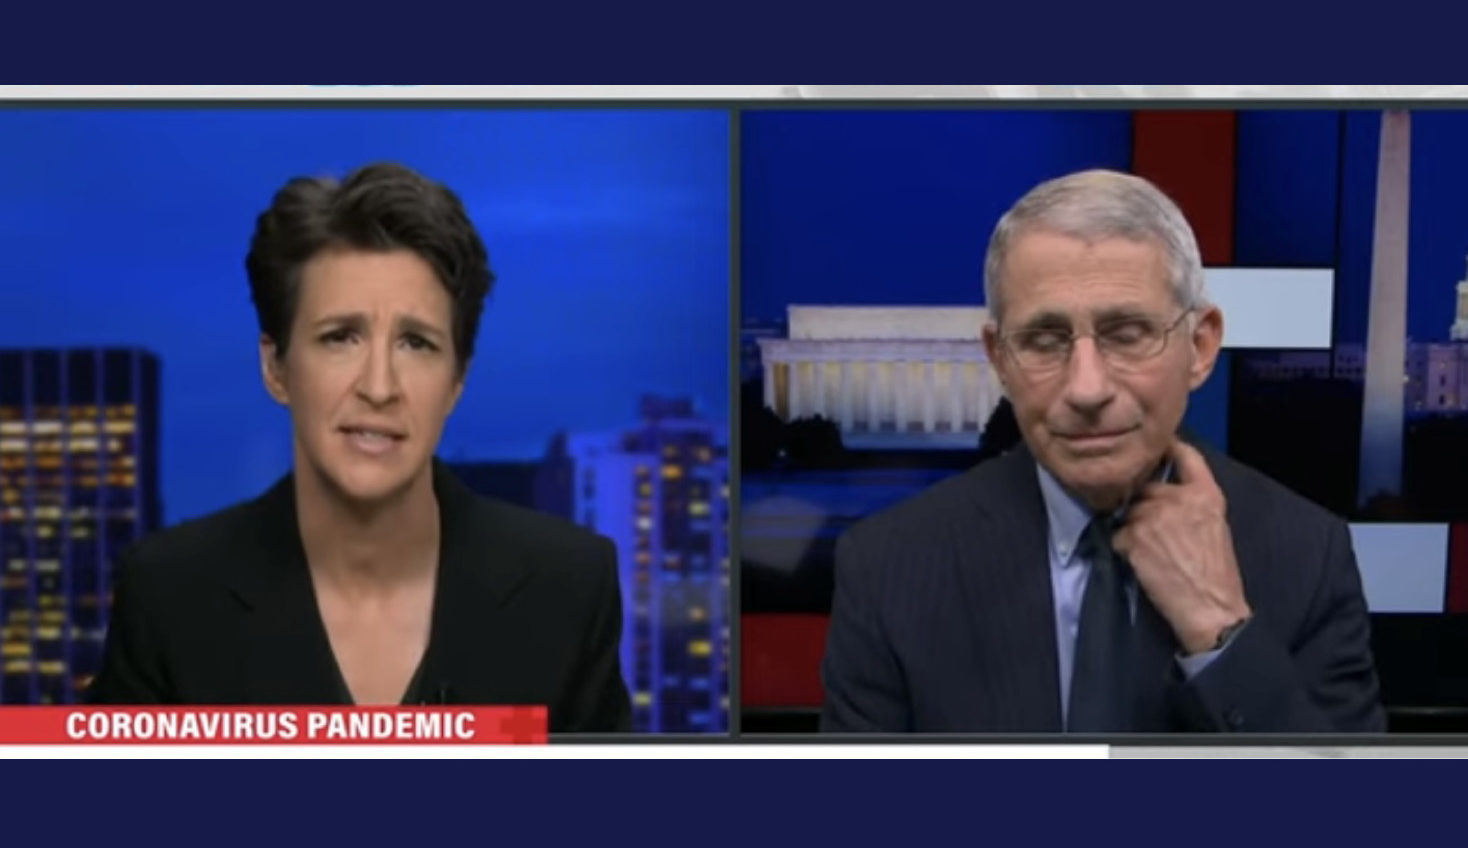 Rachel Maddow (left) and Dr. Anthony Fauci (right) on the Rachel Maddow Show